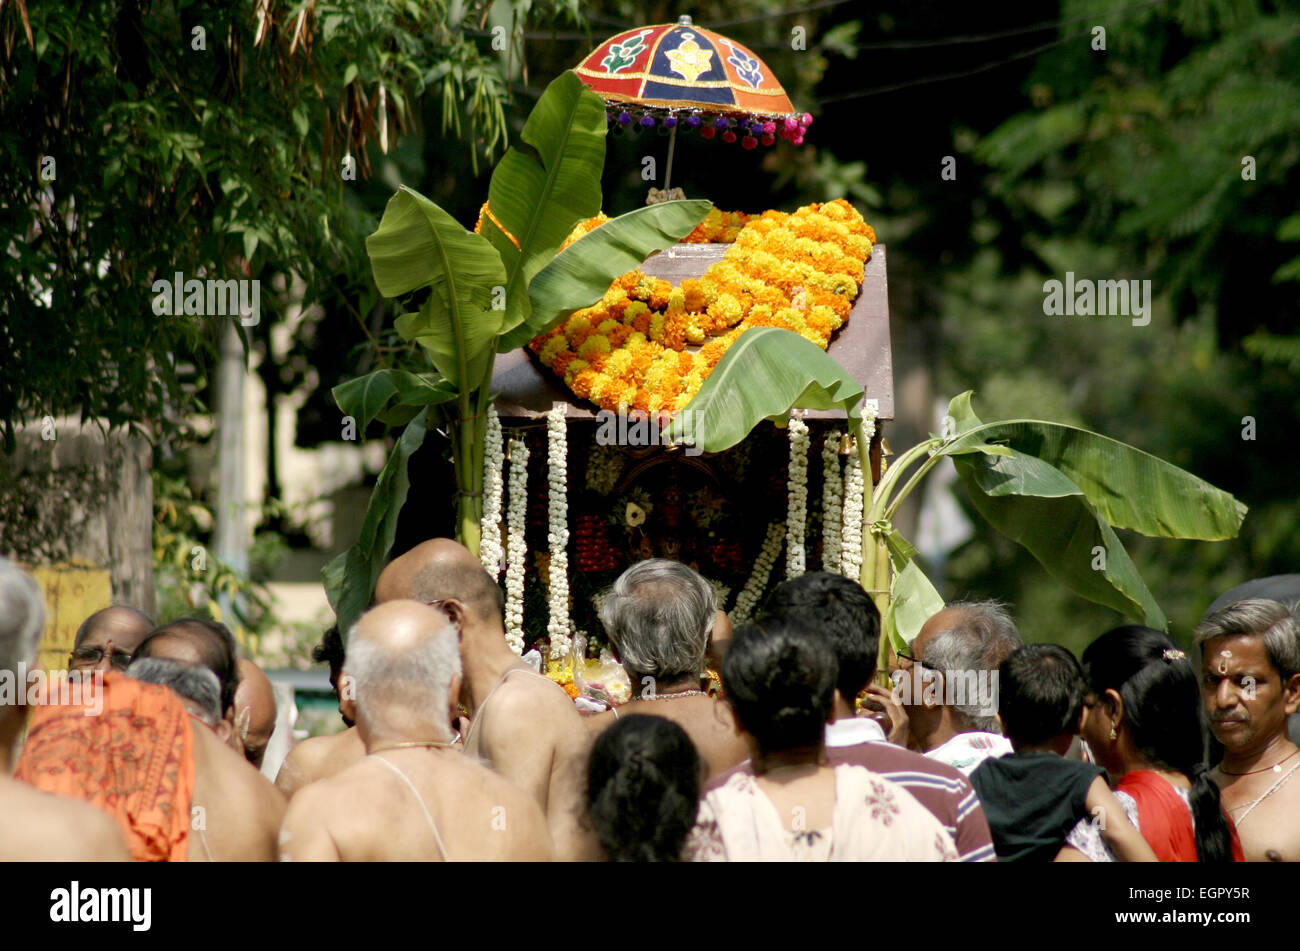 Hindu devotees take procession of lord Subramanya swamy in the streets with murugan kavadi in Hyderabad,India on April 13,2014. Stock Photo